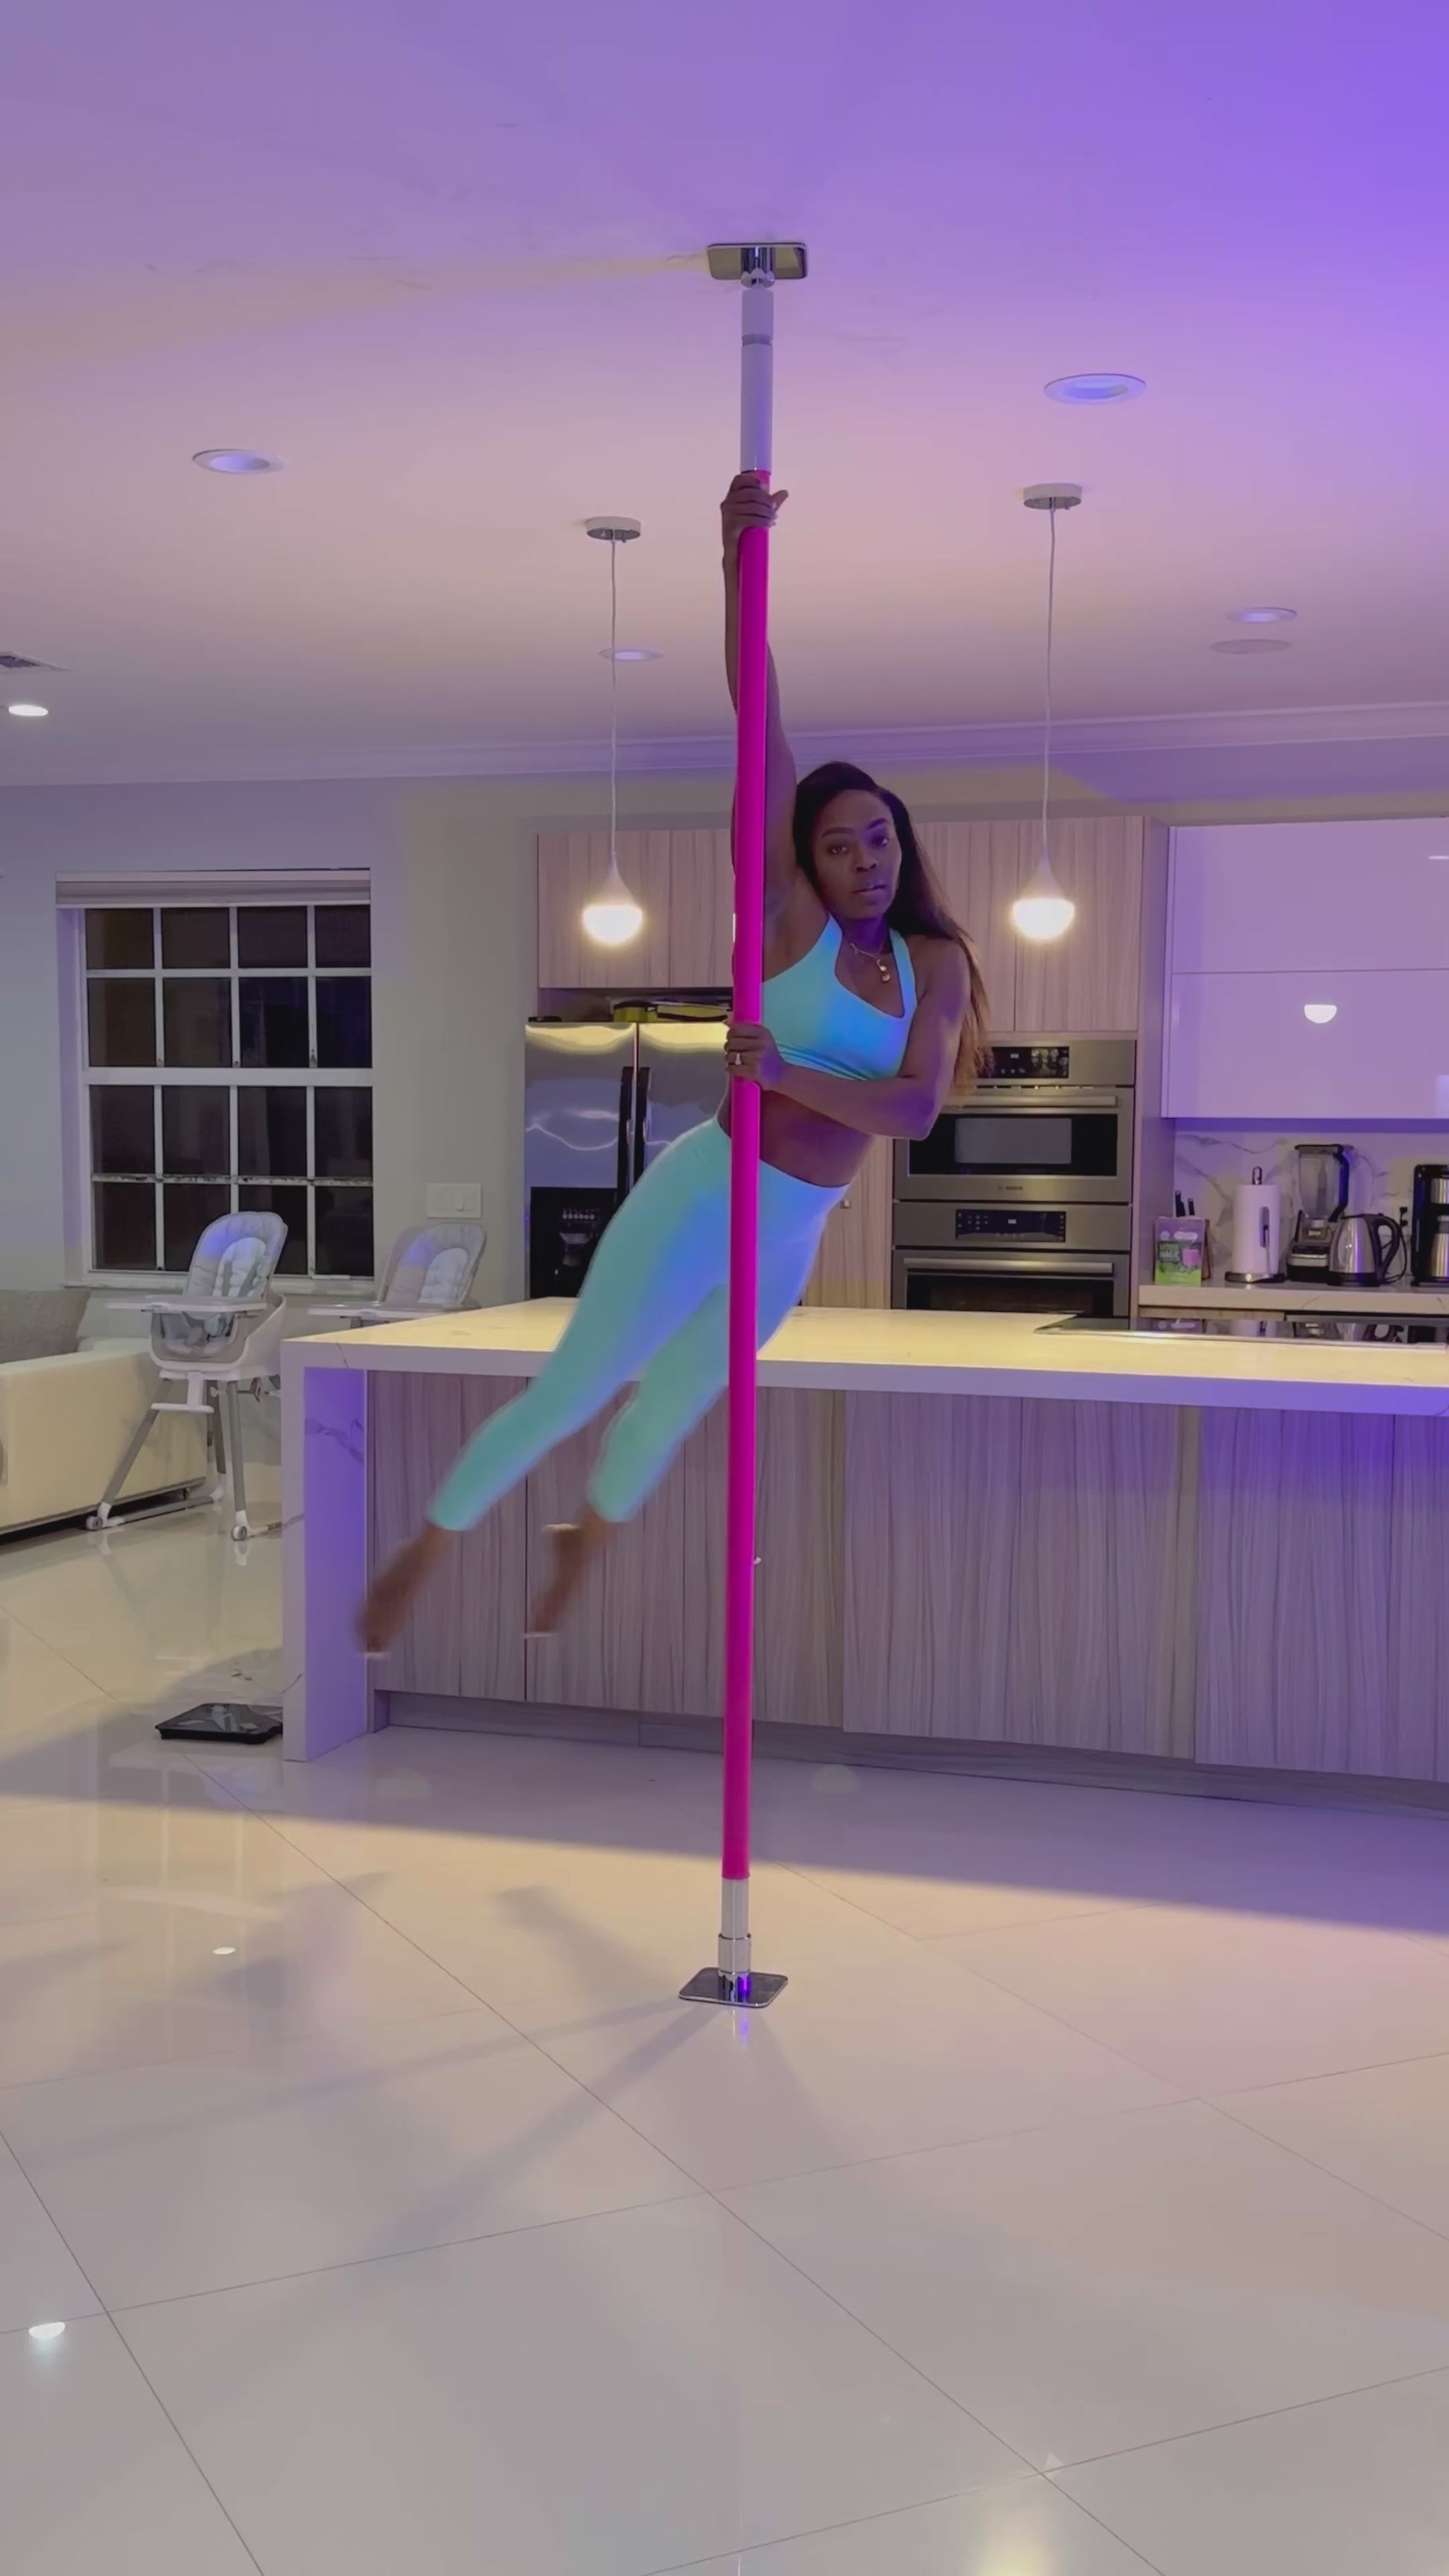 Pole Dancing Costume offers site and quality at the best price - Pole  Dancing Costume